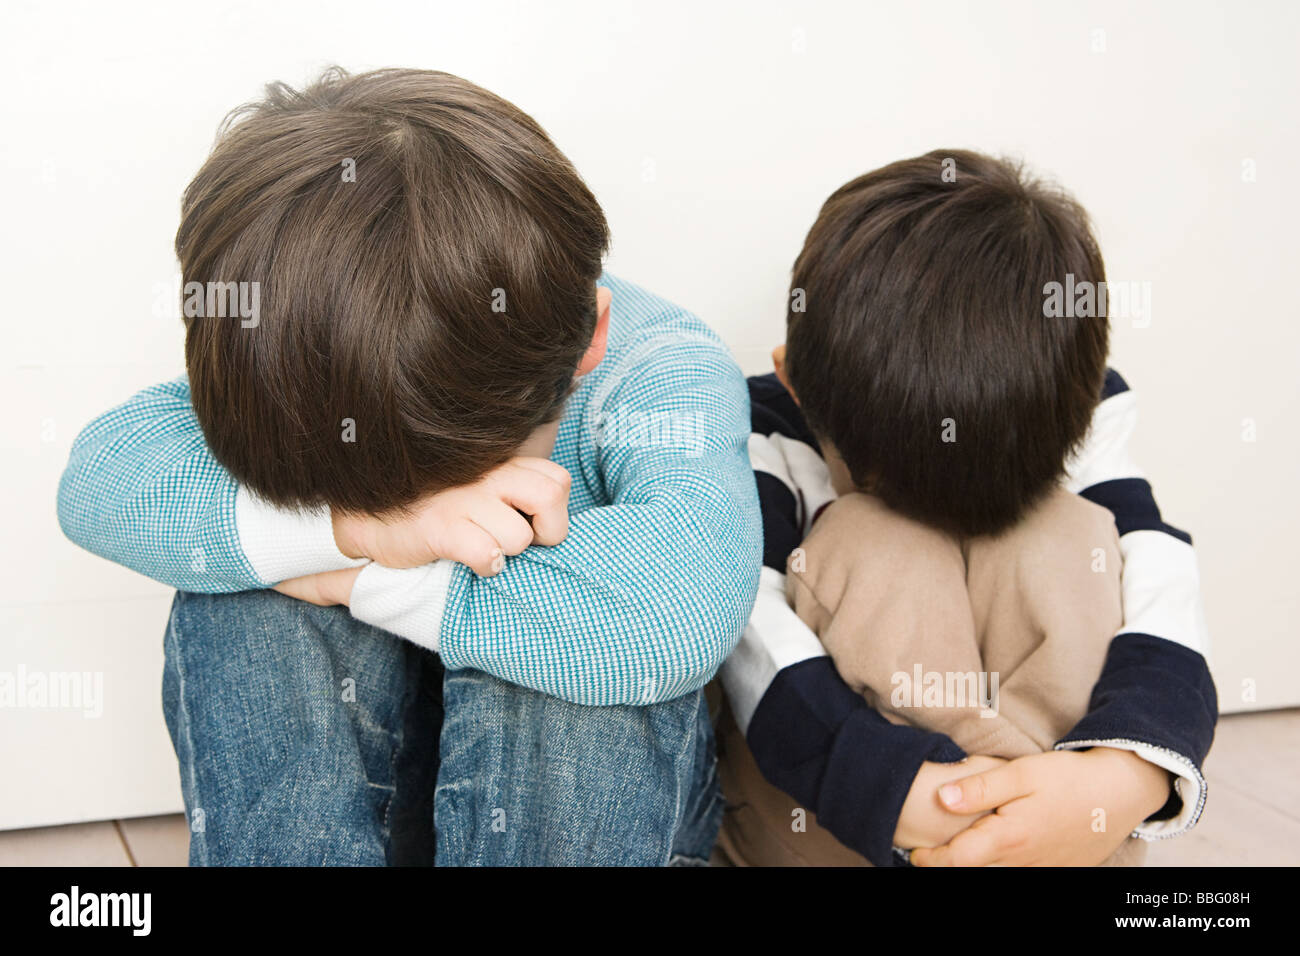 Boys covering their faces Stock Photo